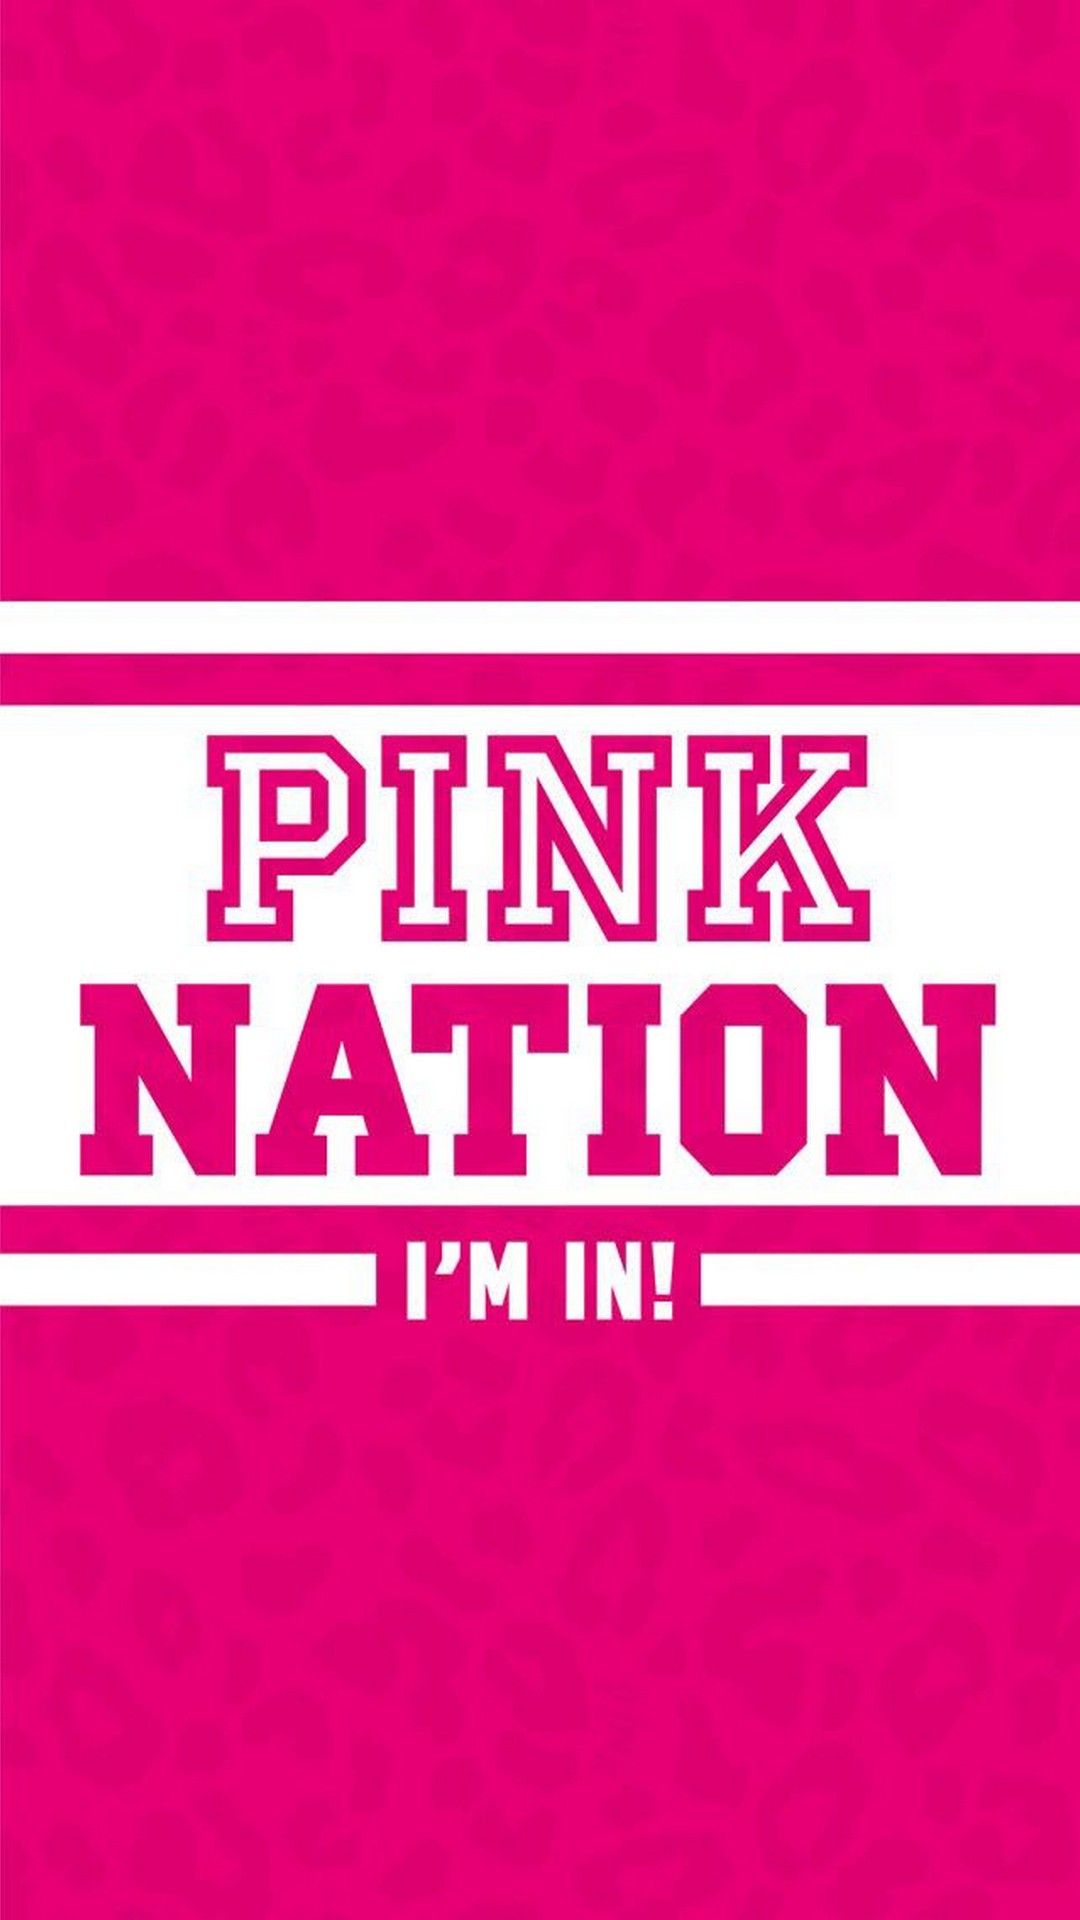 Pink Nation Wallpaper For Mobile Cute Wallpaper